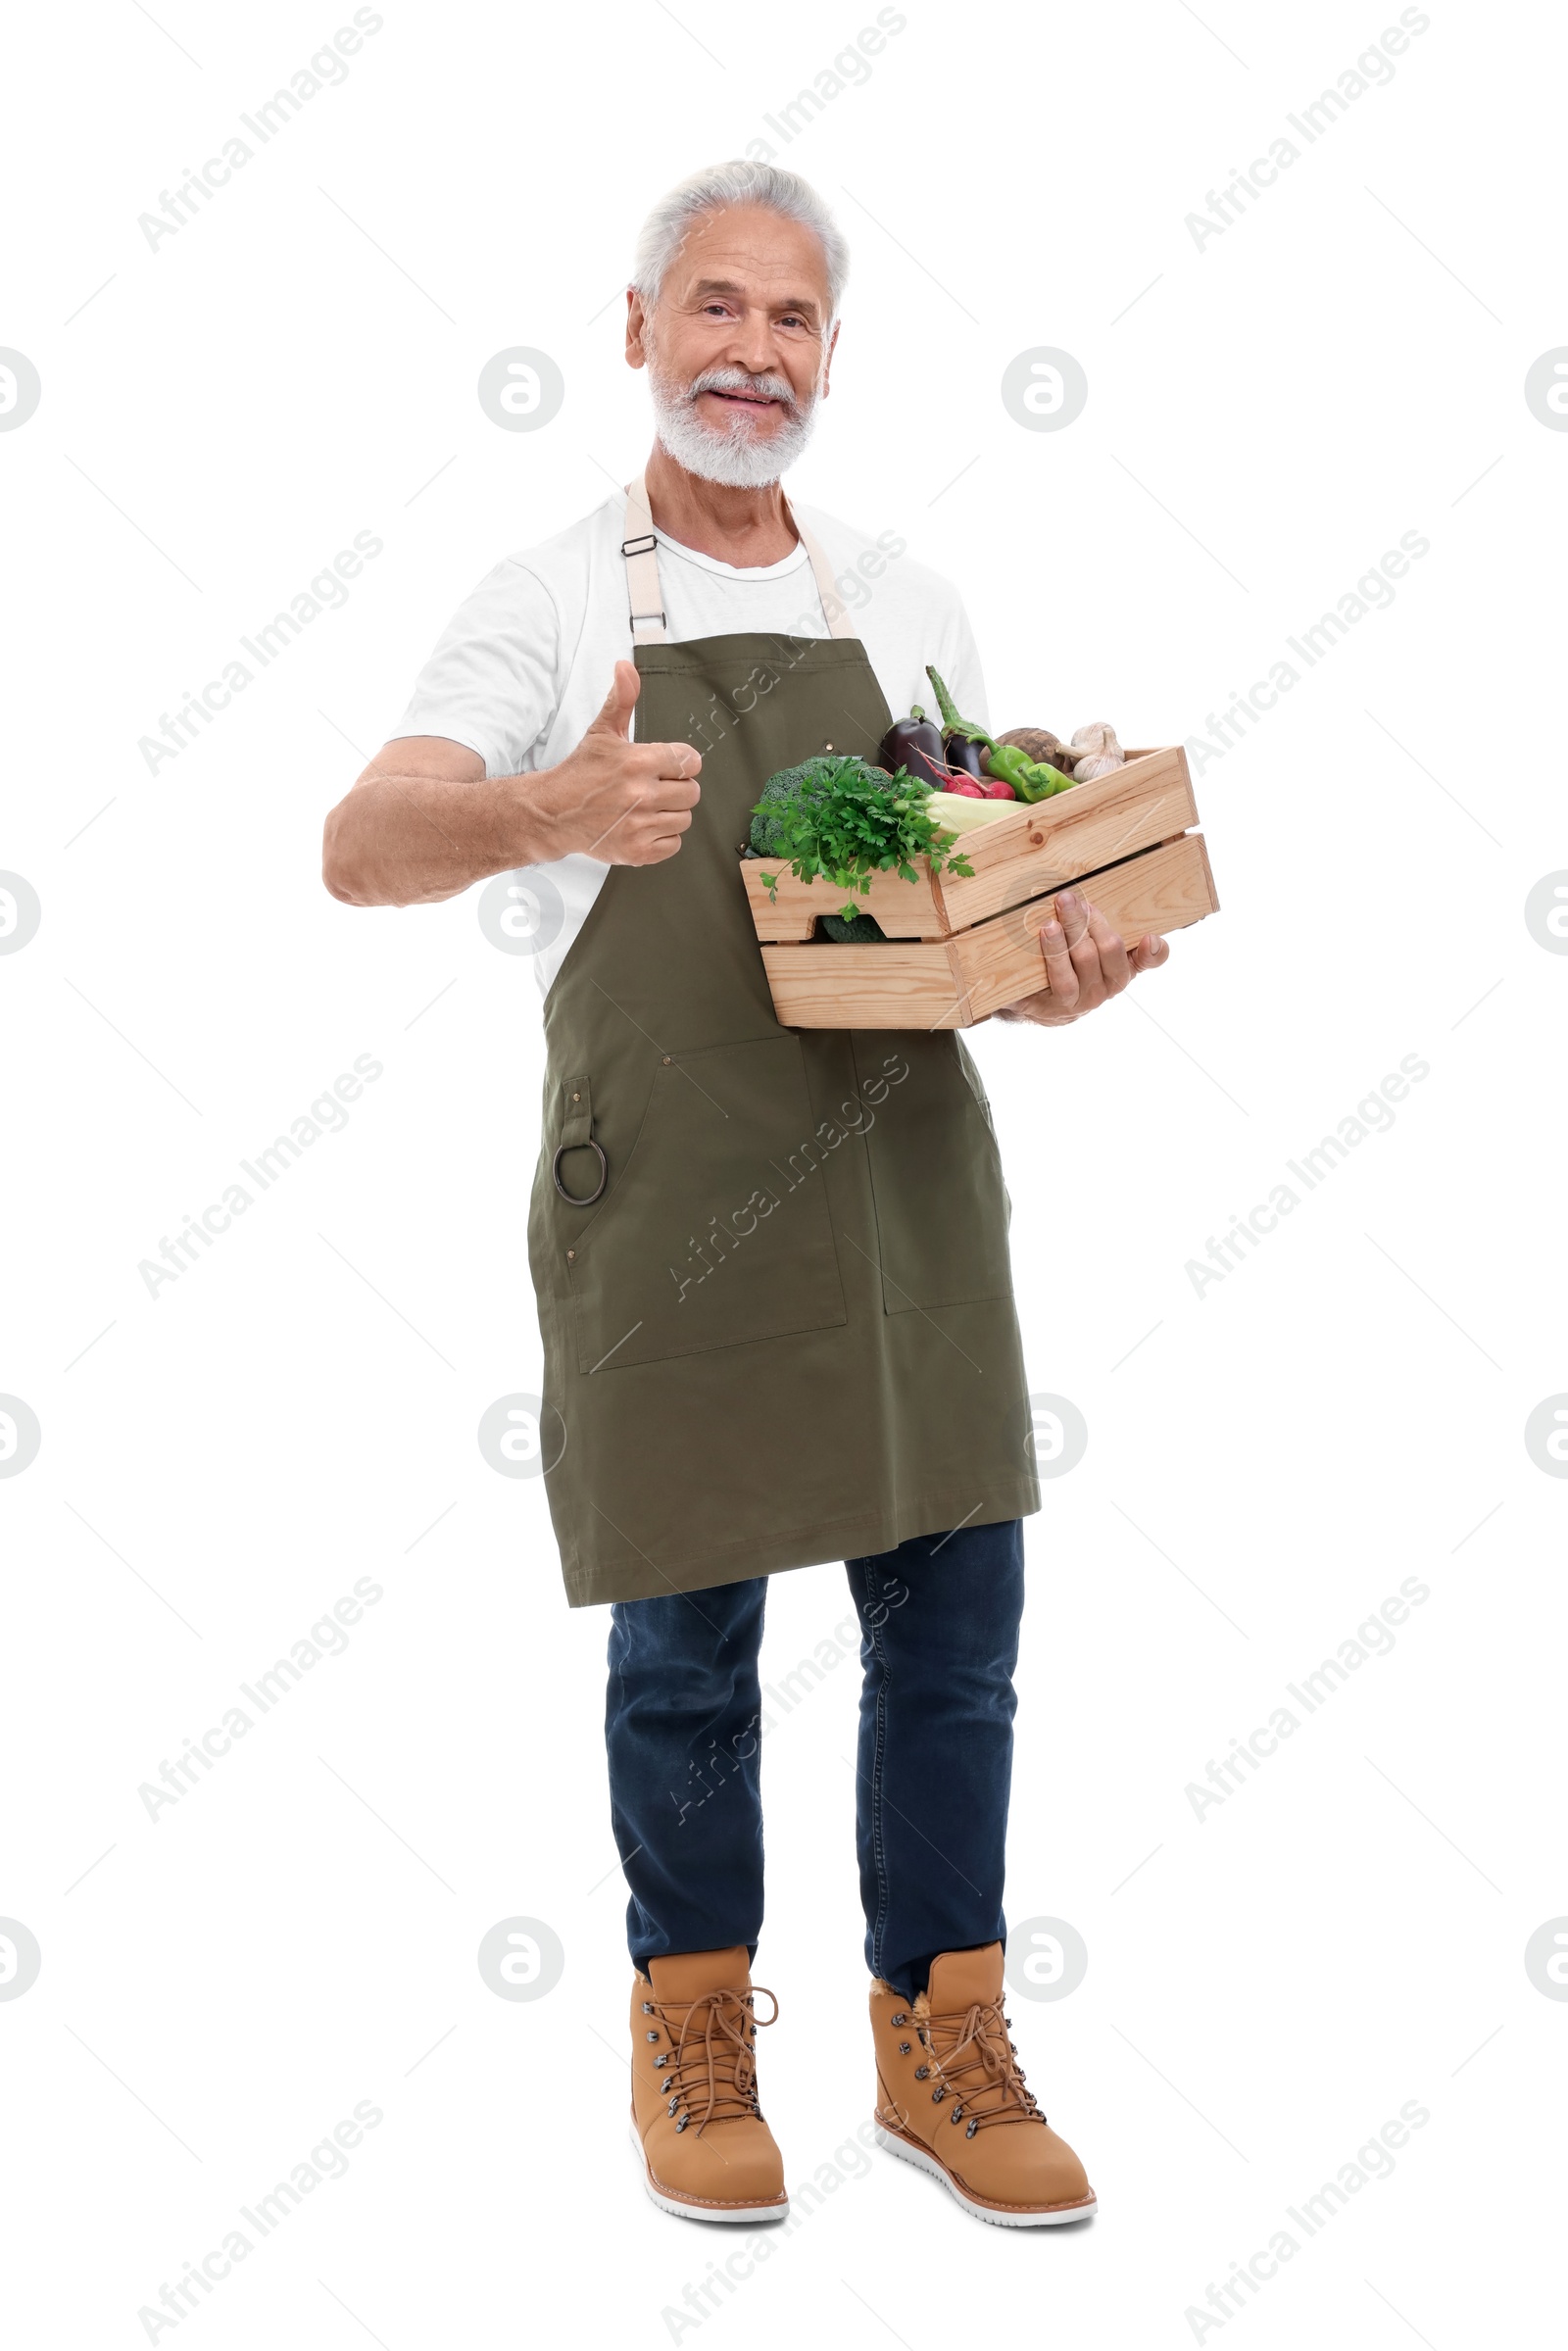 Photo of Harvesting season. Happy farmer holding wooden crate with vegetables and showing thumb up on white background